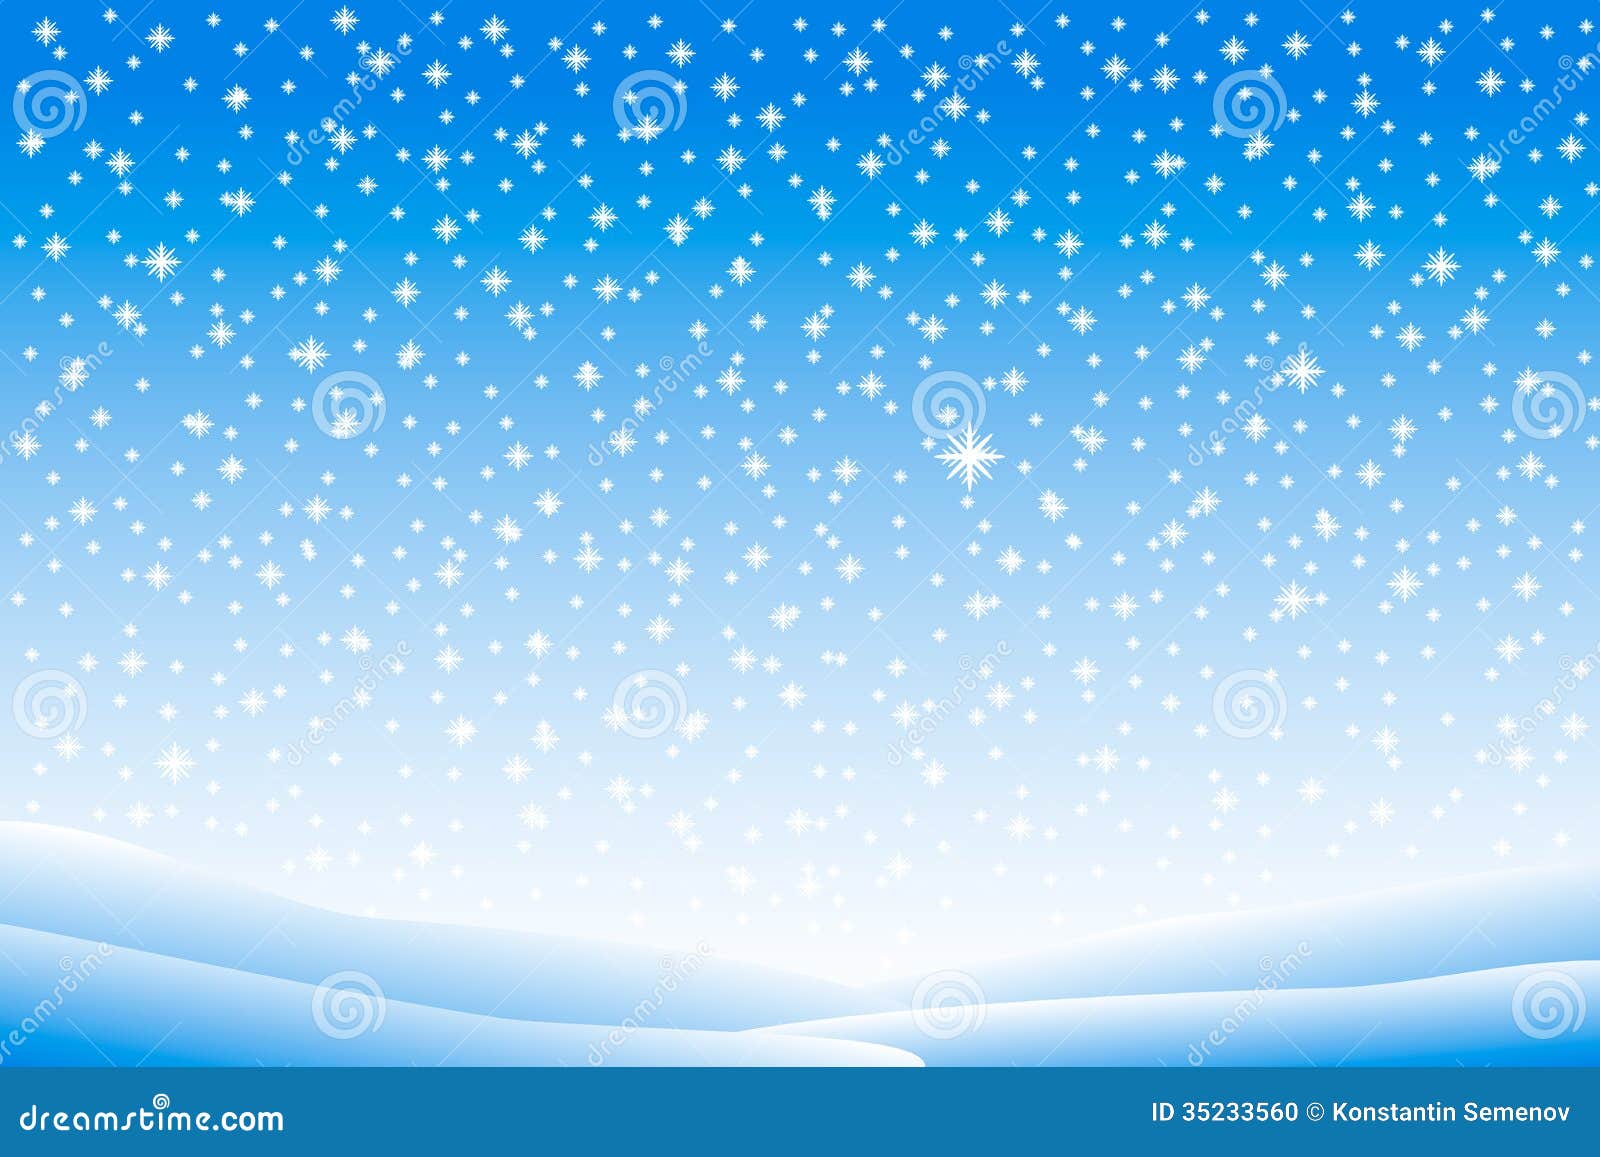 clipart of snow falling - photo #13